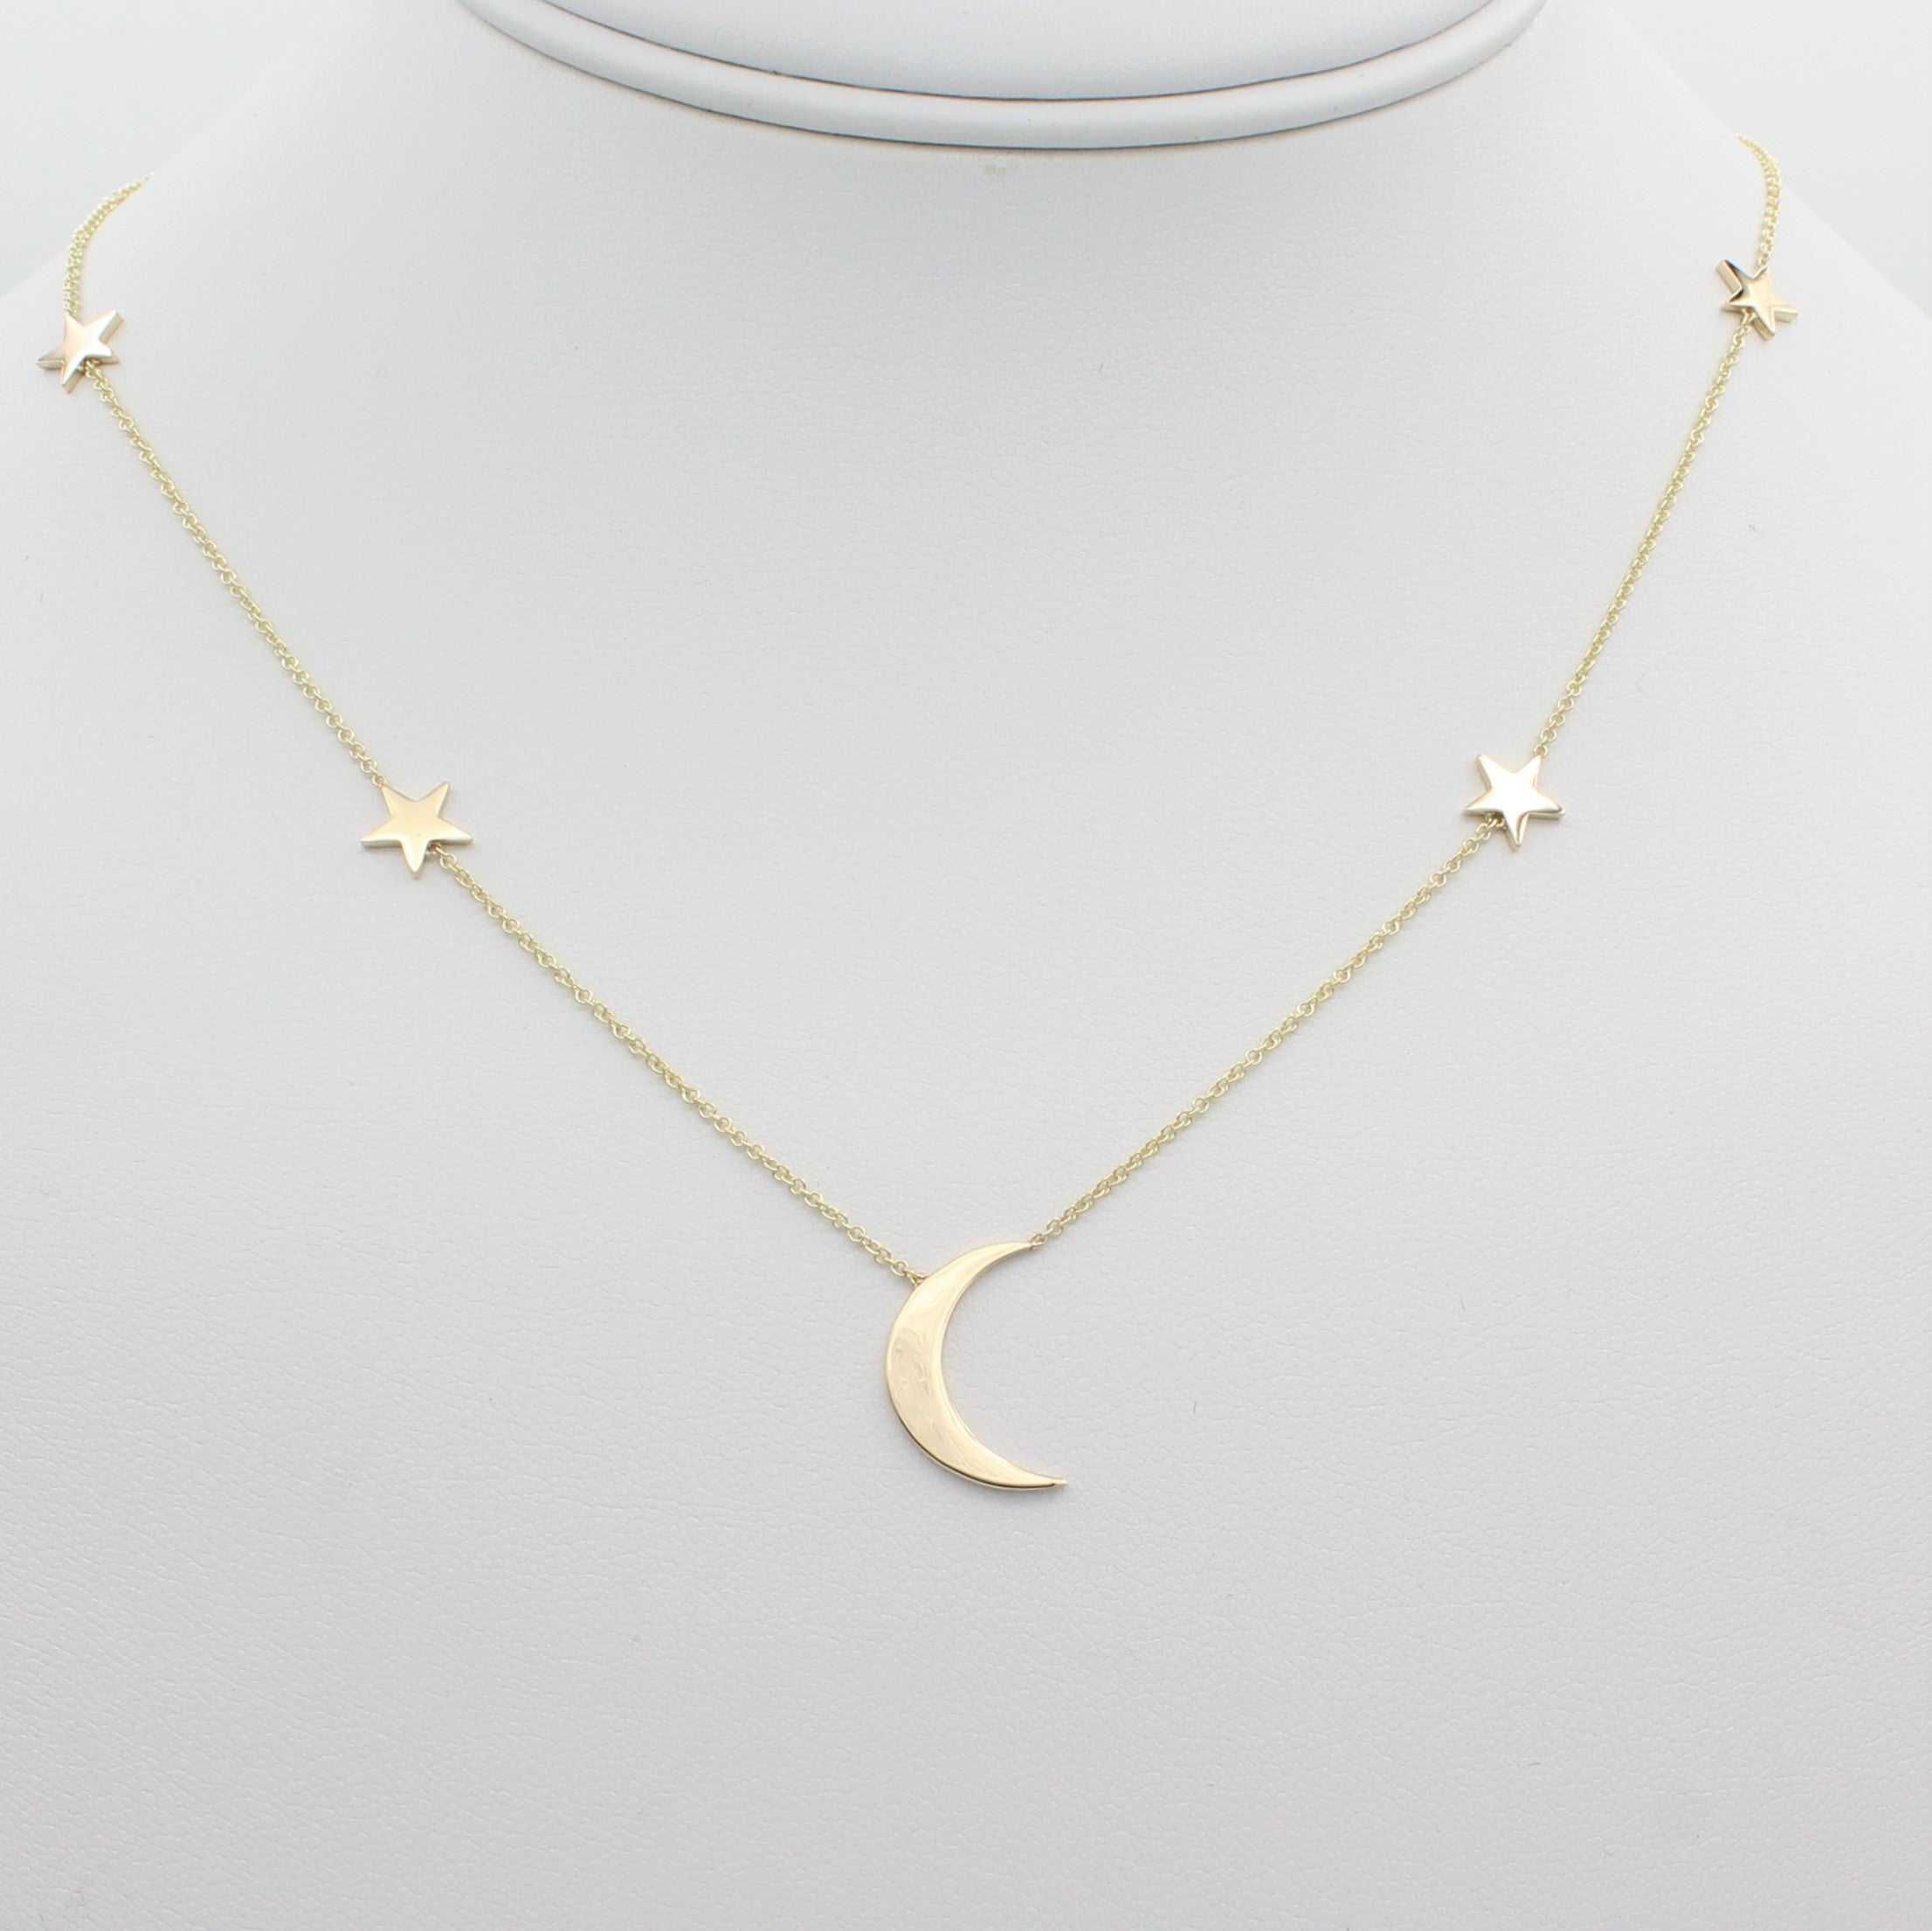 14k Yellow Gold Shoot for the Moon Station Necklace, front view of necklace highlighting the five station star and moon design.